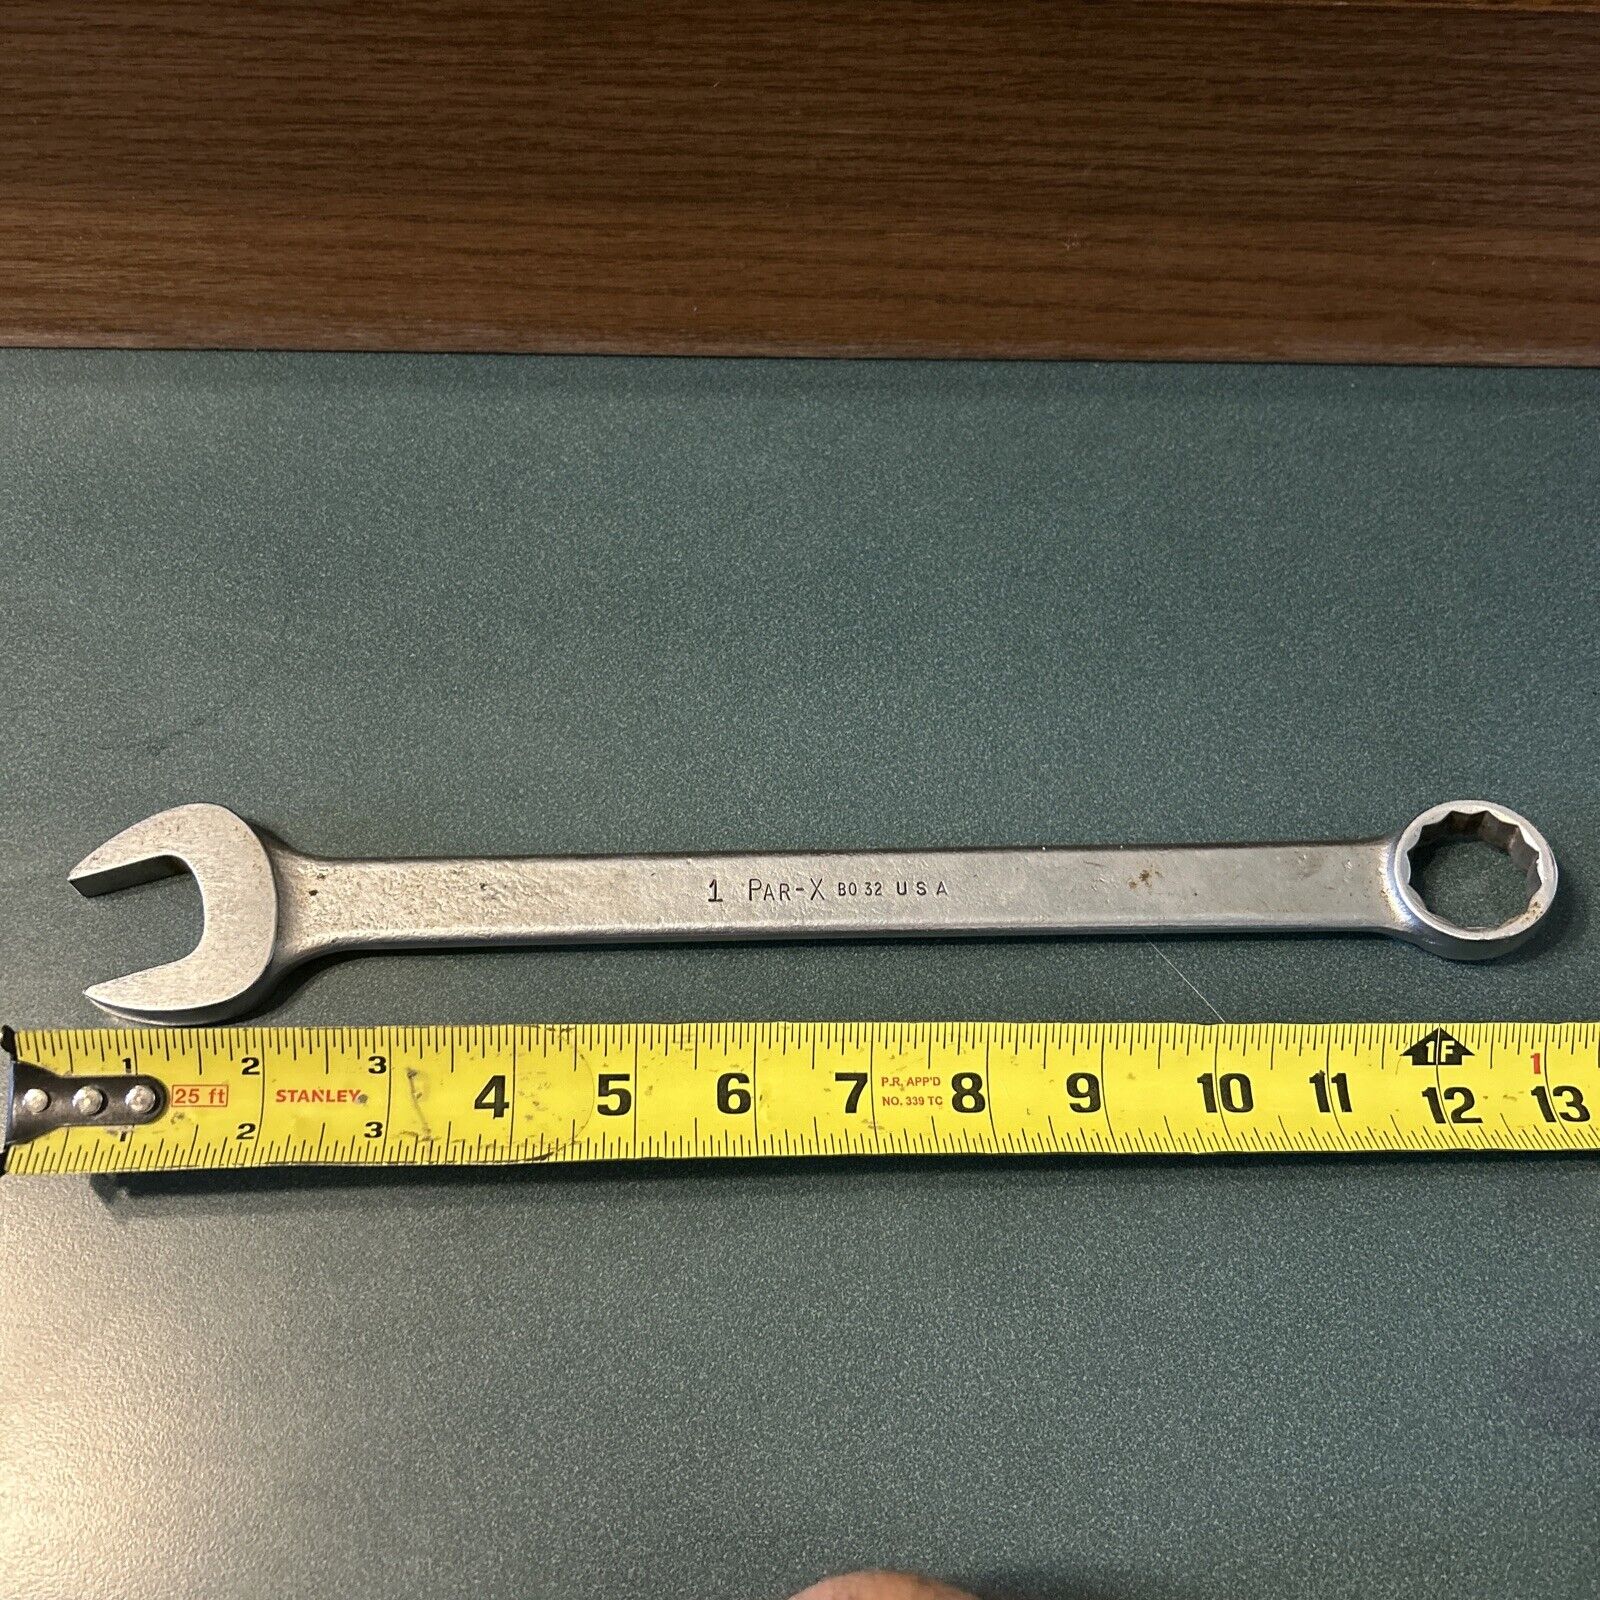 Par-X - B032 - Combination Wrench  1” Made in USA Vintage